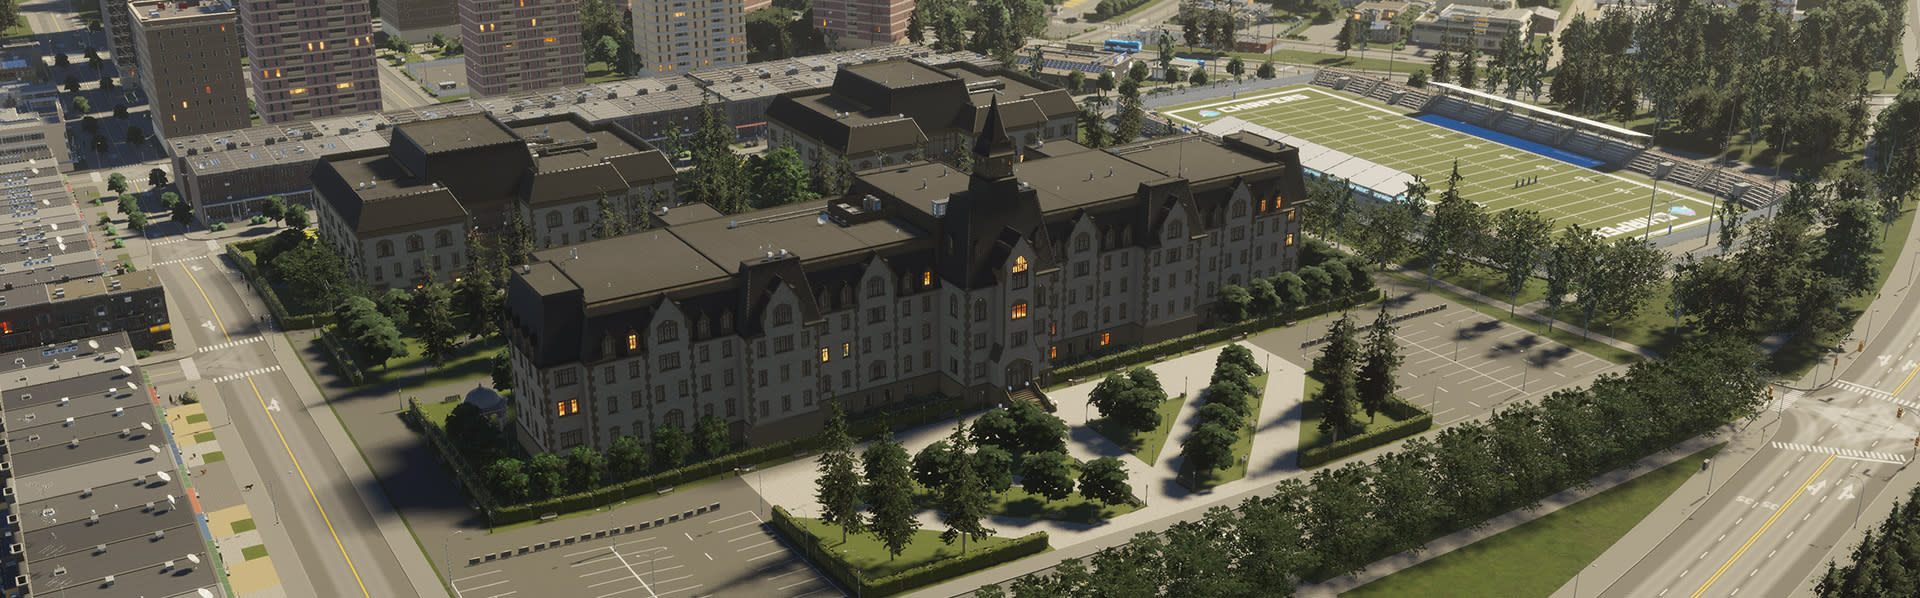 cities-skylines-ii-city-services-7 College